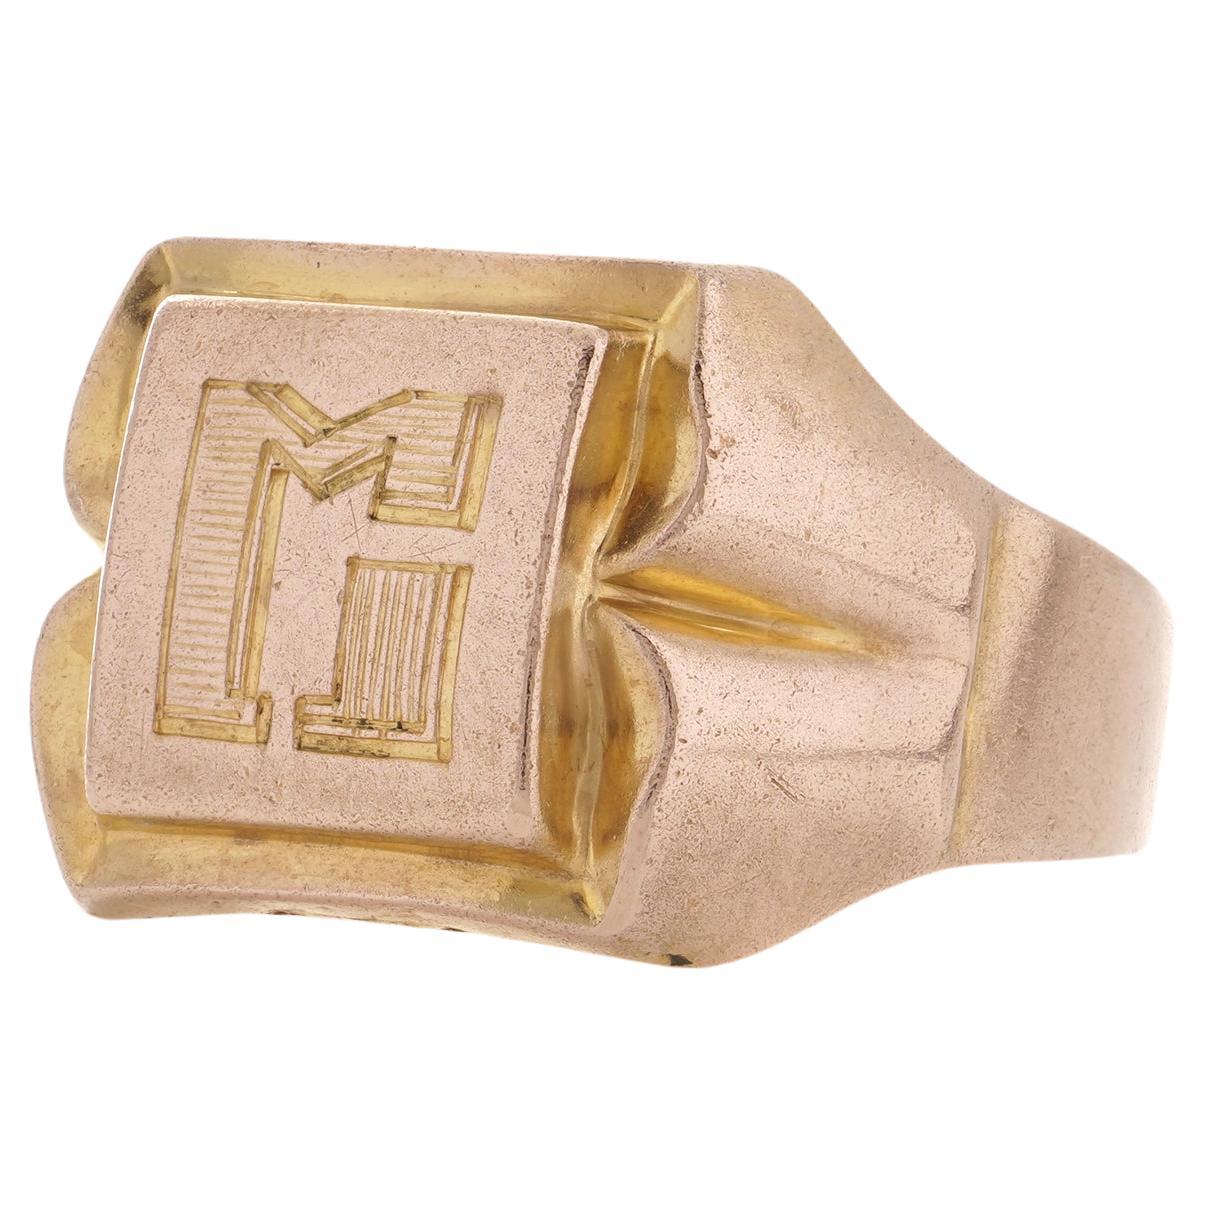 Antique 18kt yellow gold band men's large size Z ring with initial letter M. 
Made in France, 1910 - 1920's 
Hallmarked with an eagle’s head, a standard for 18kt gold. 
Dimensions - 

Finger Size (UK) = Z(EU) = 68.7 (US) = 12.5 
Weight: 5.3